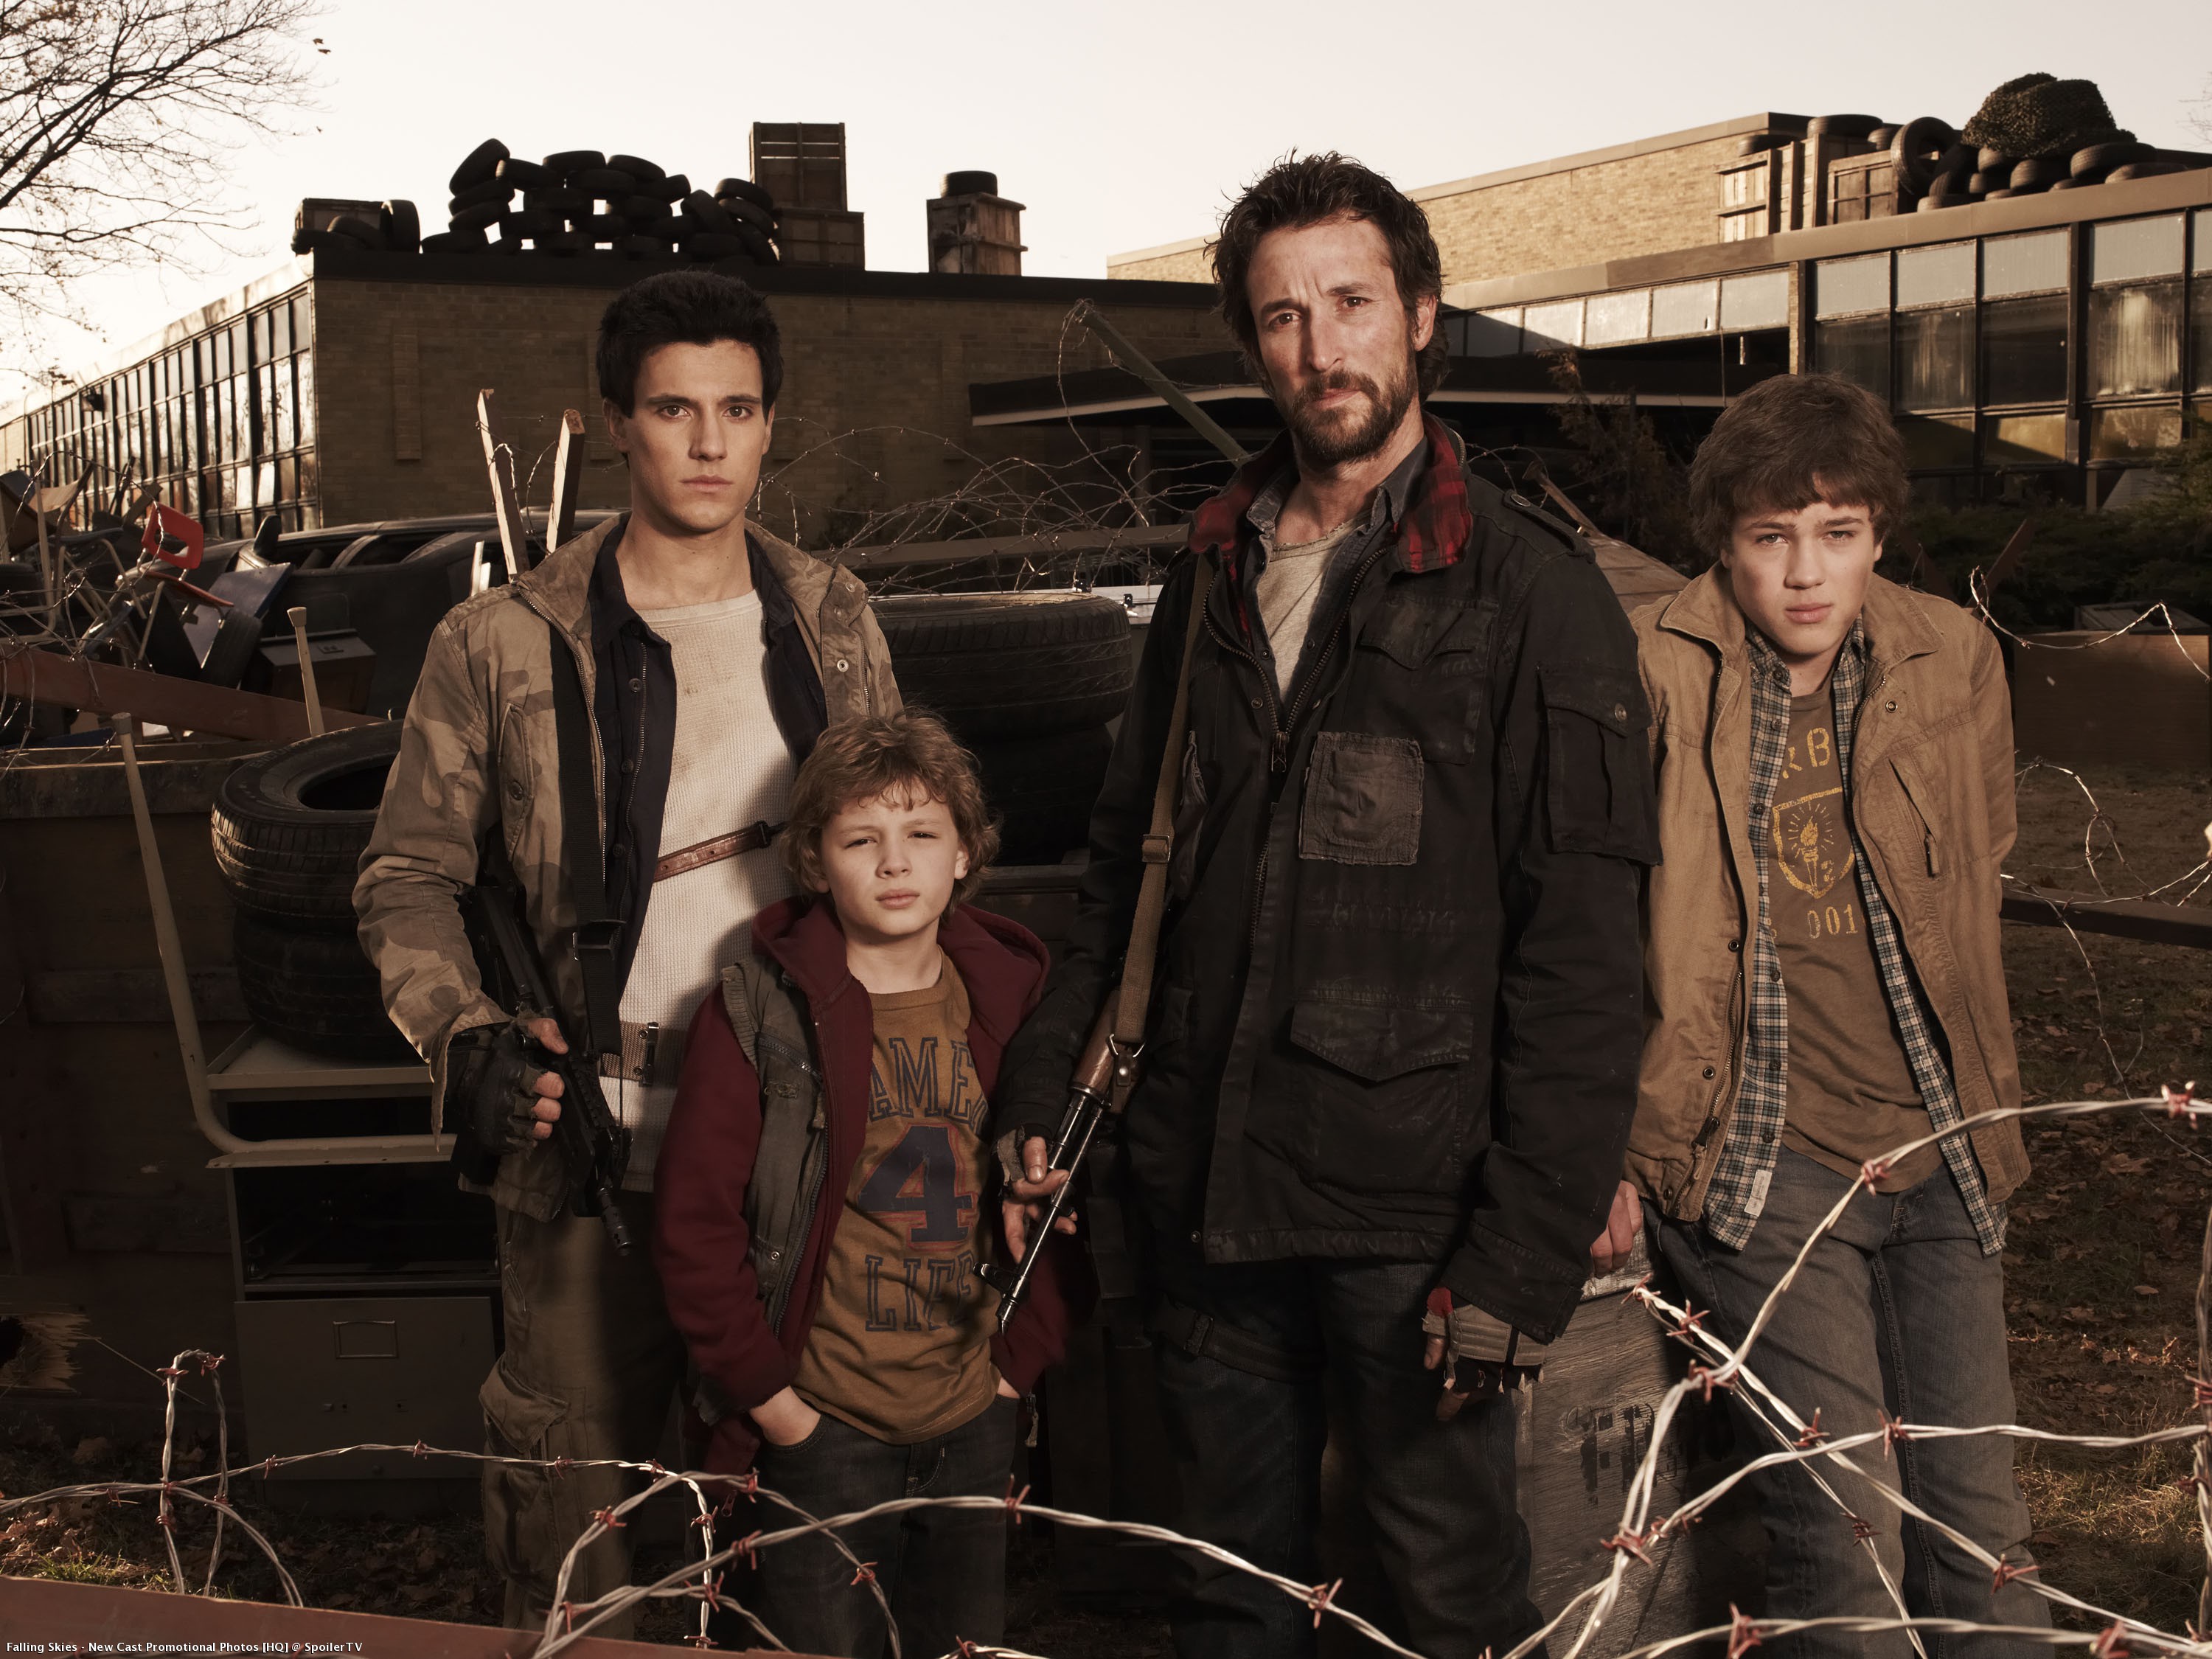 Promotional still from the TNT series 'Falling Skies'. From left to right: Drew Roy as Hal, Maxim Knight as Matt, Noah Wyle as Tom and Connor Jessup as Ben.